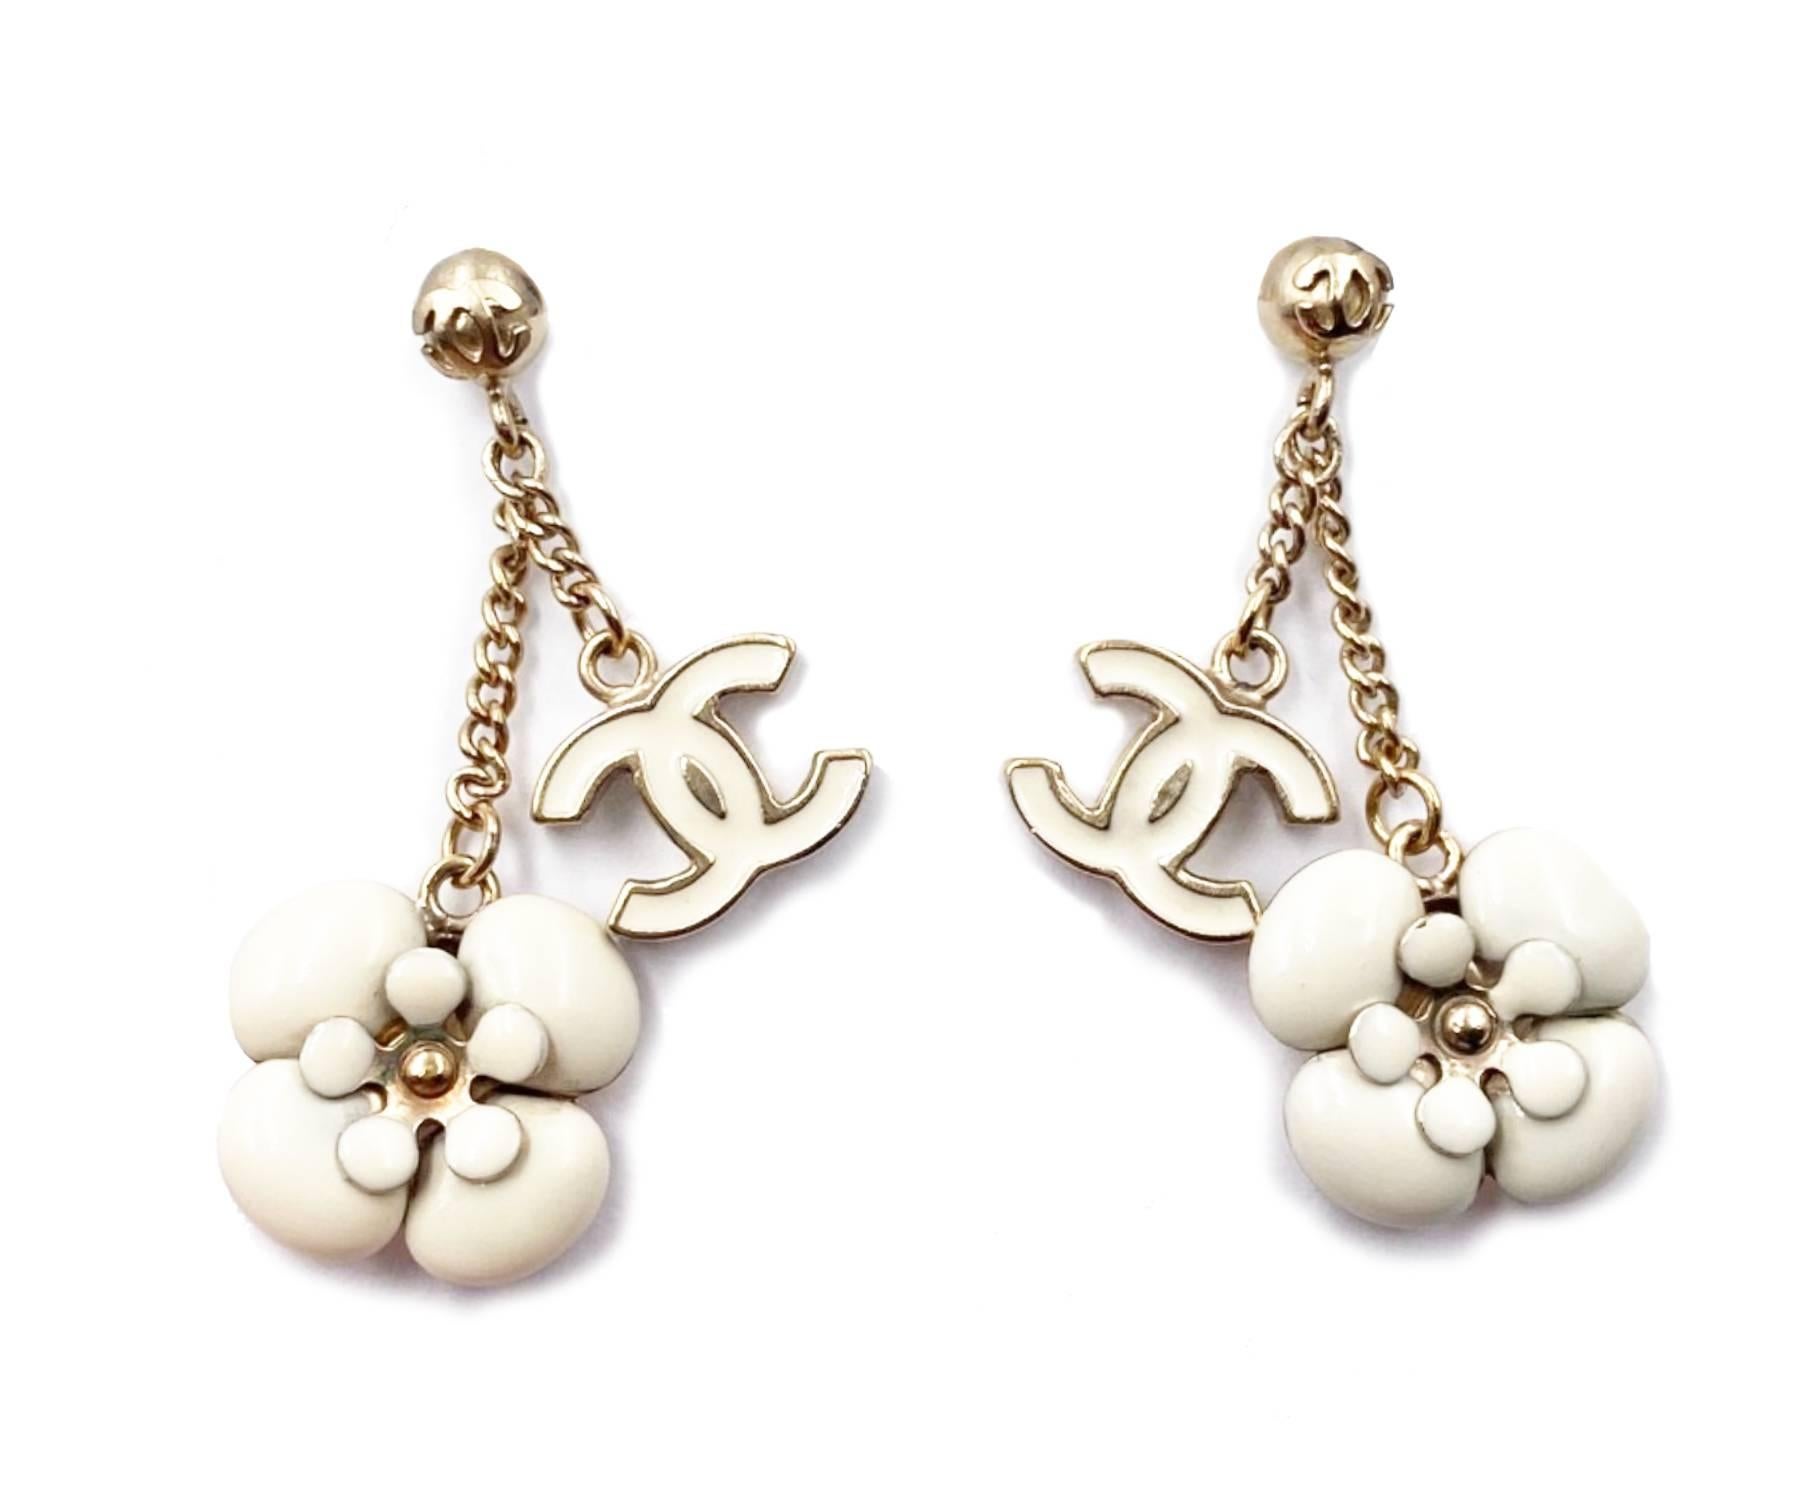 Chanel Gold Plated CC Ivory Camellia Flower Dangle Piercing Earrings

*Marked 06
*Made in Italy

-It is approximately 1.5